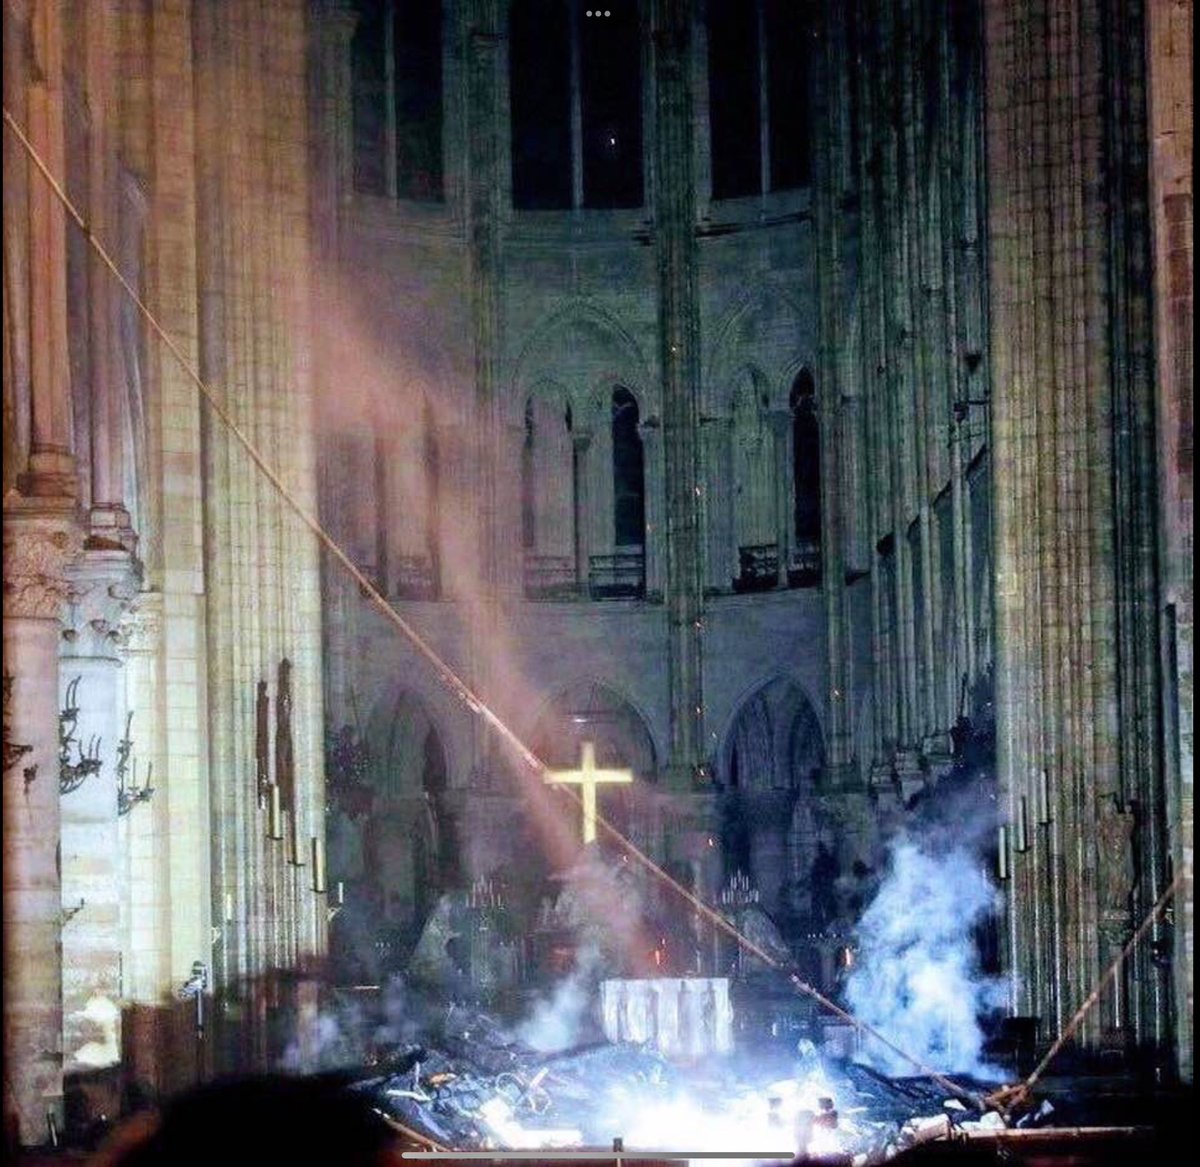 My iPhone reminds me of this photo from 4yrs ago - morning after Notre-Dame fire. The cross reflected the light in the ruin in way I could scarcely believe was real. It was. I was on Easter hols and sent to Freddy Gray who was editing. His instinct was to change covers… (1/3)